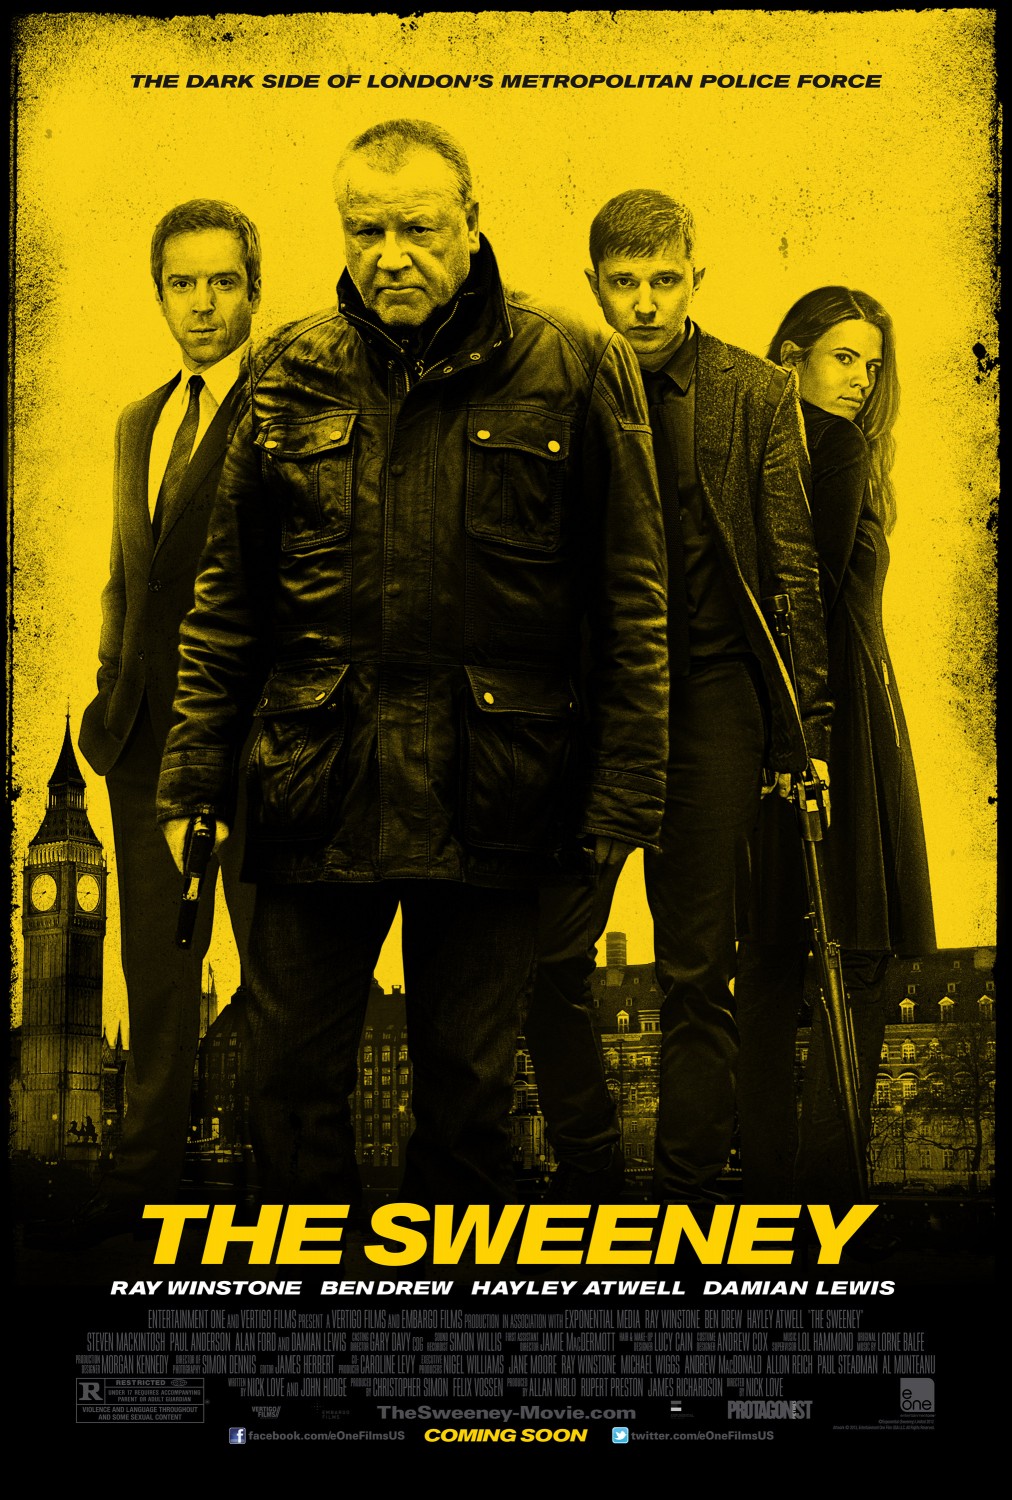 Extra Large Movie Poster Image for The Sweeney (#7 of 7)